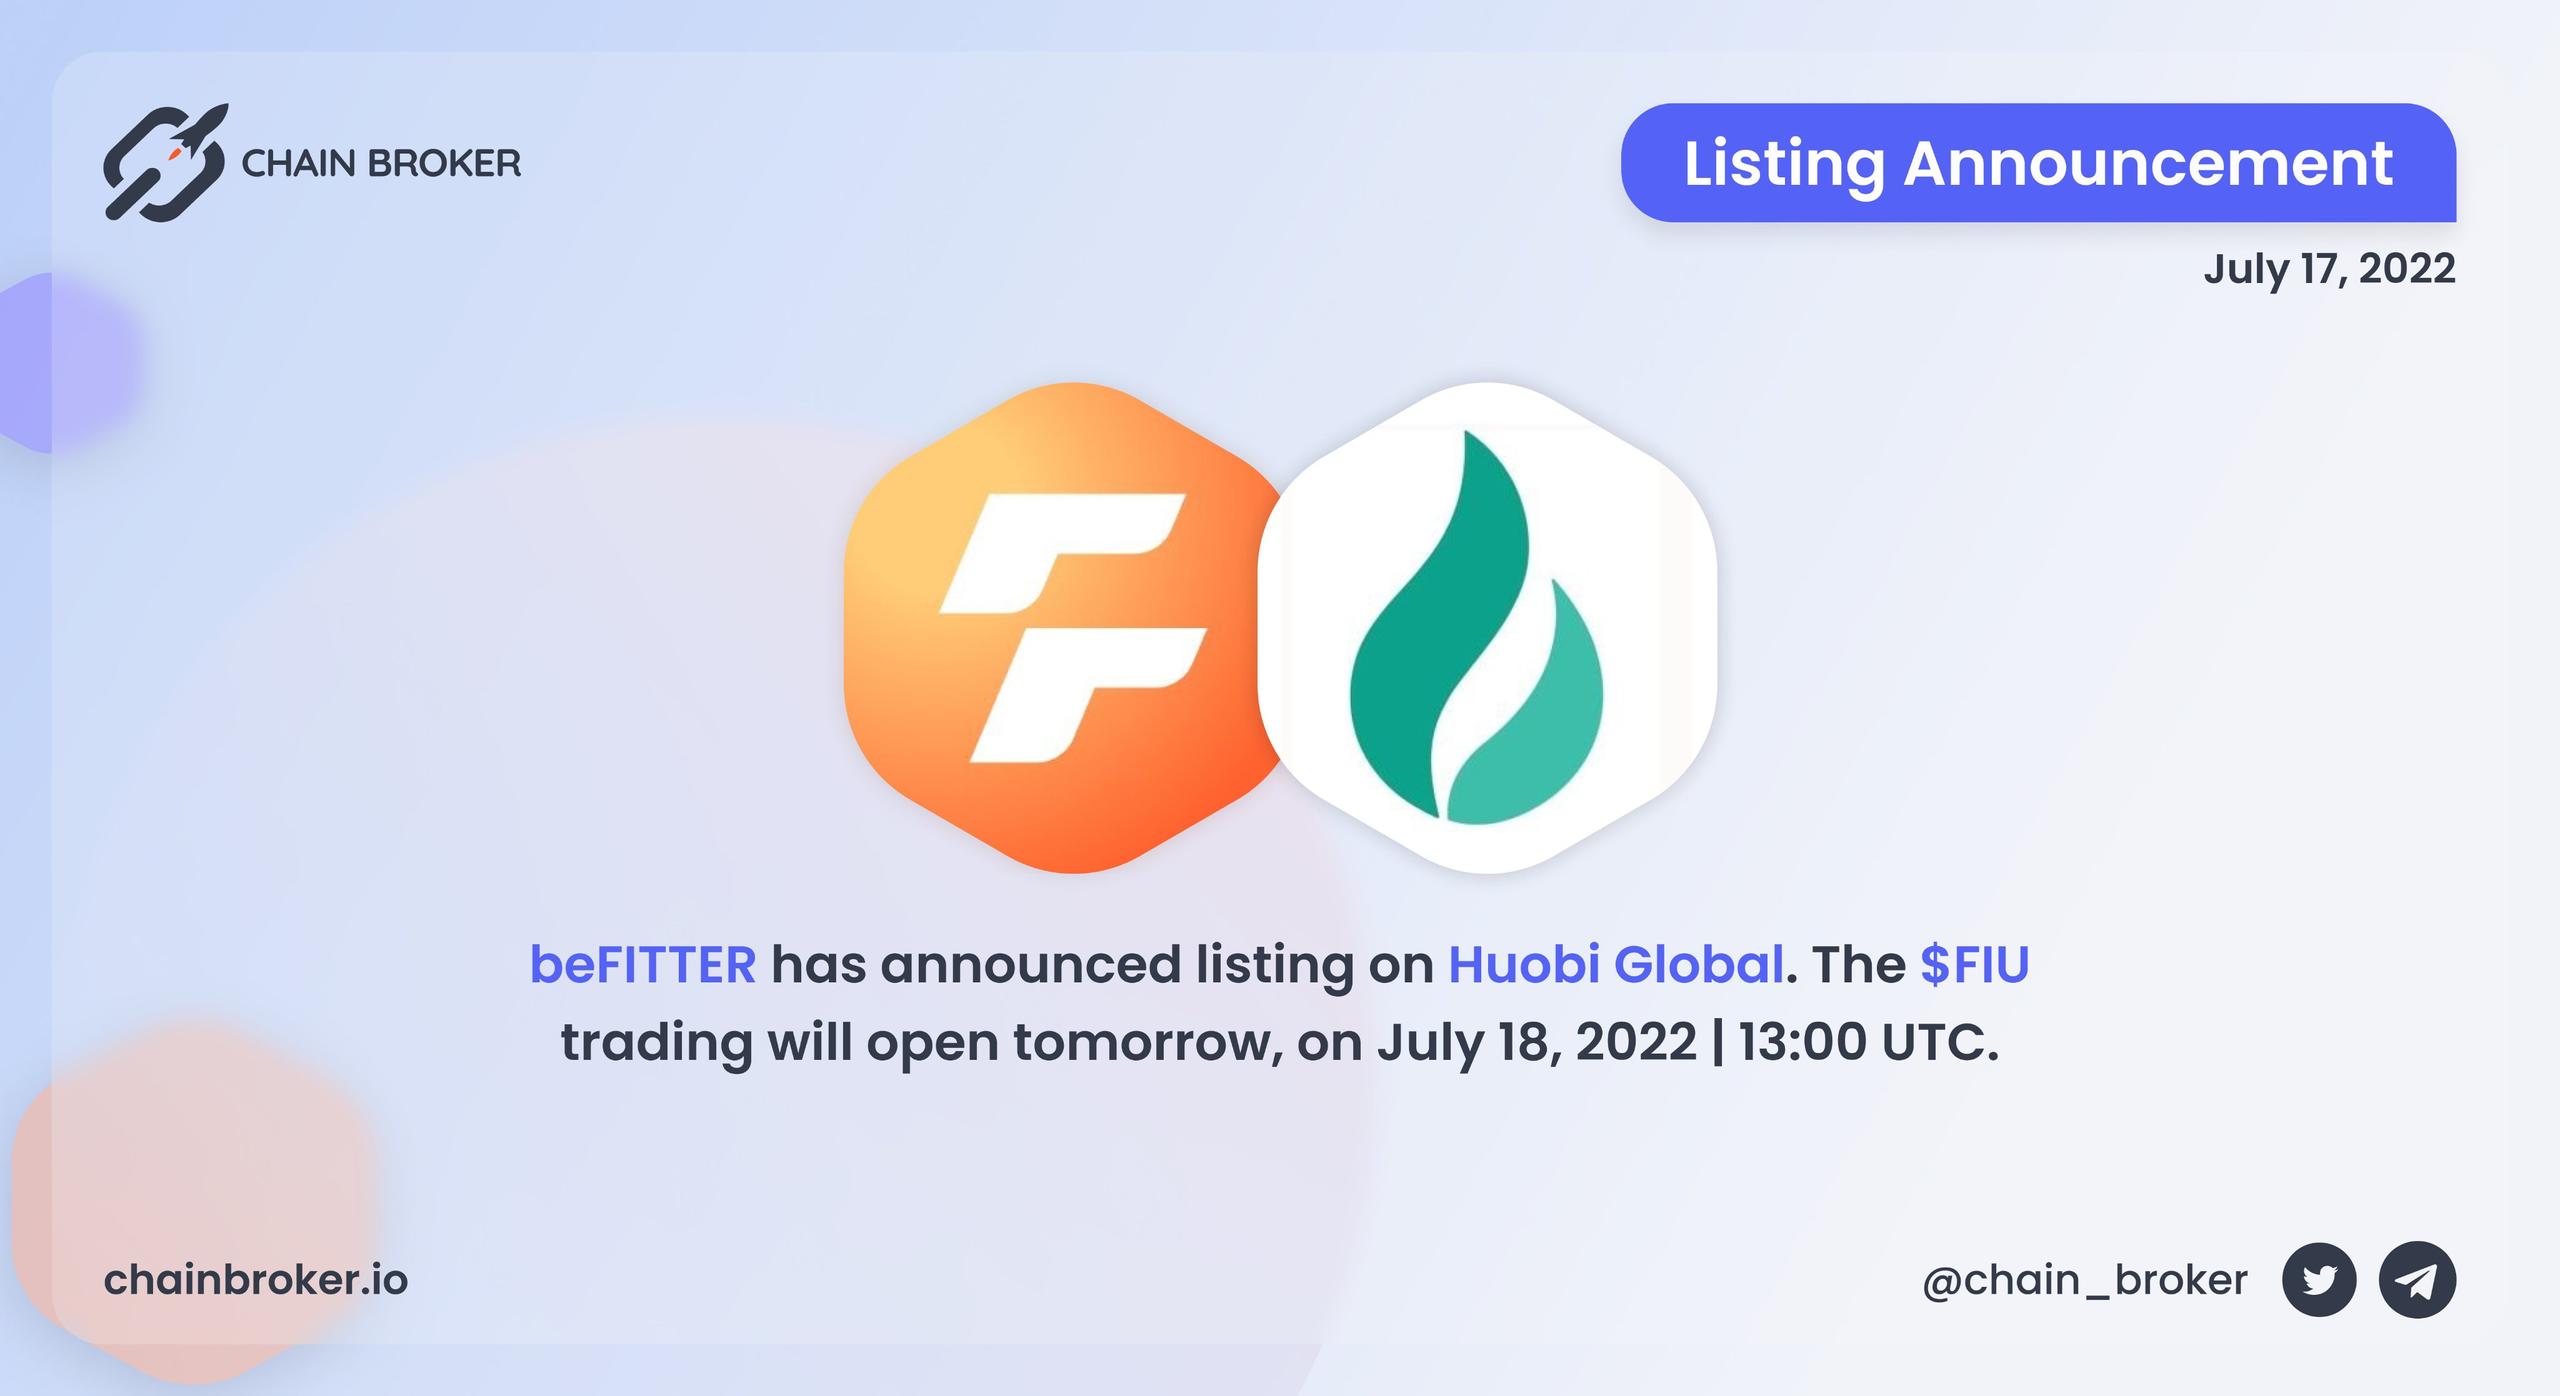 BeFITTER will be listed Huobi